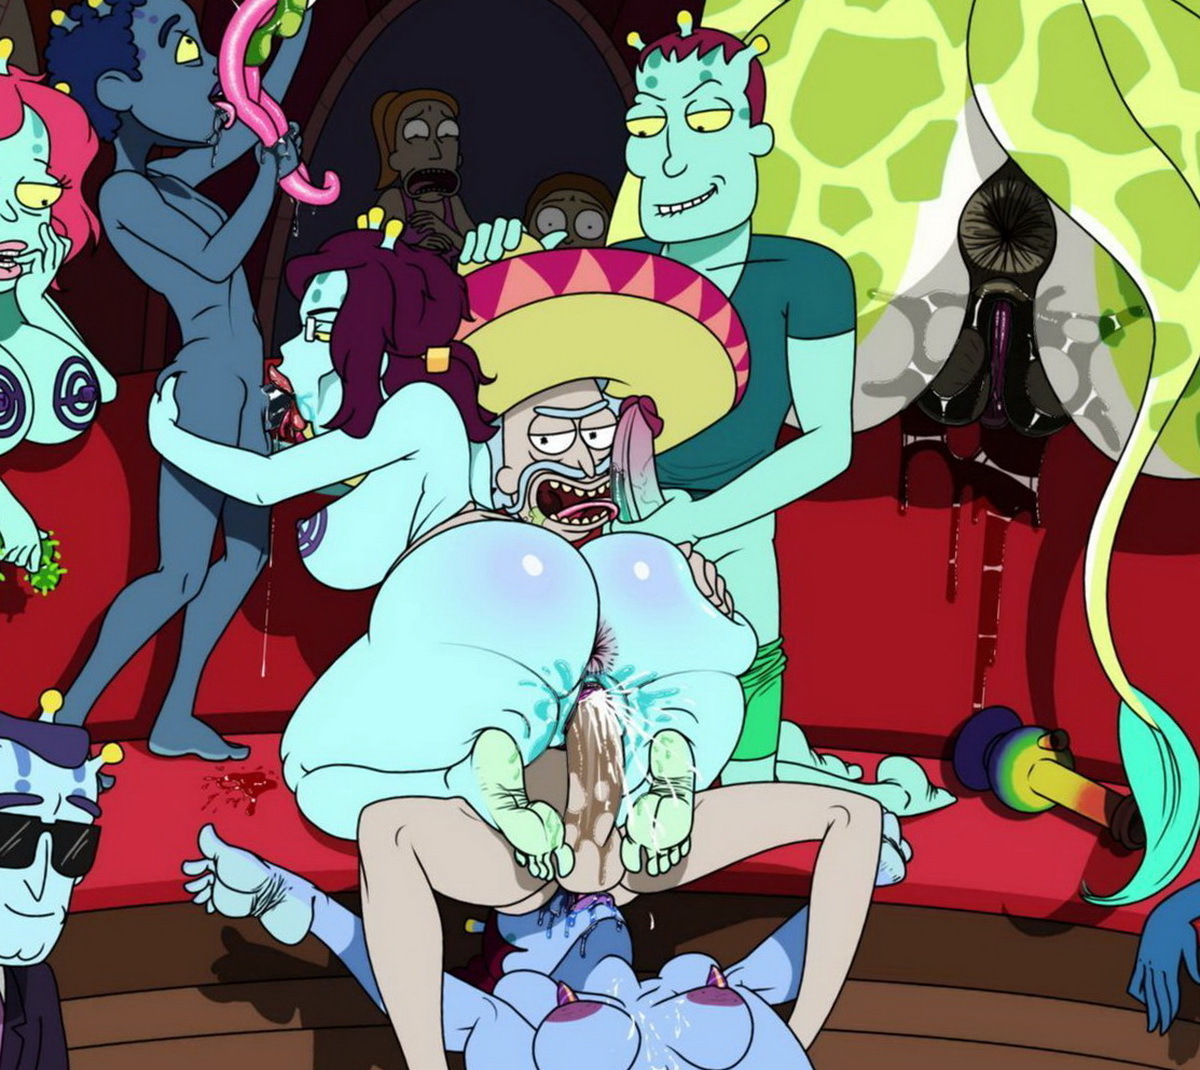 Unity porn rick and morty